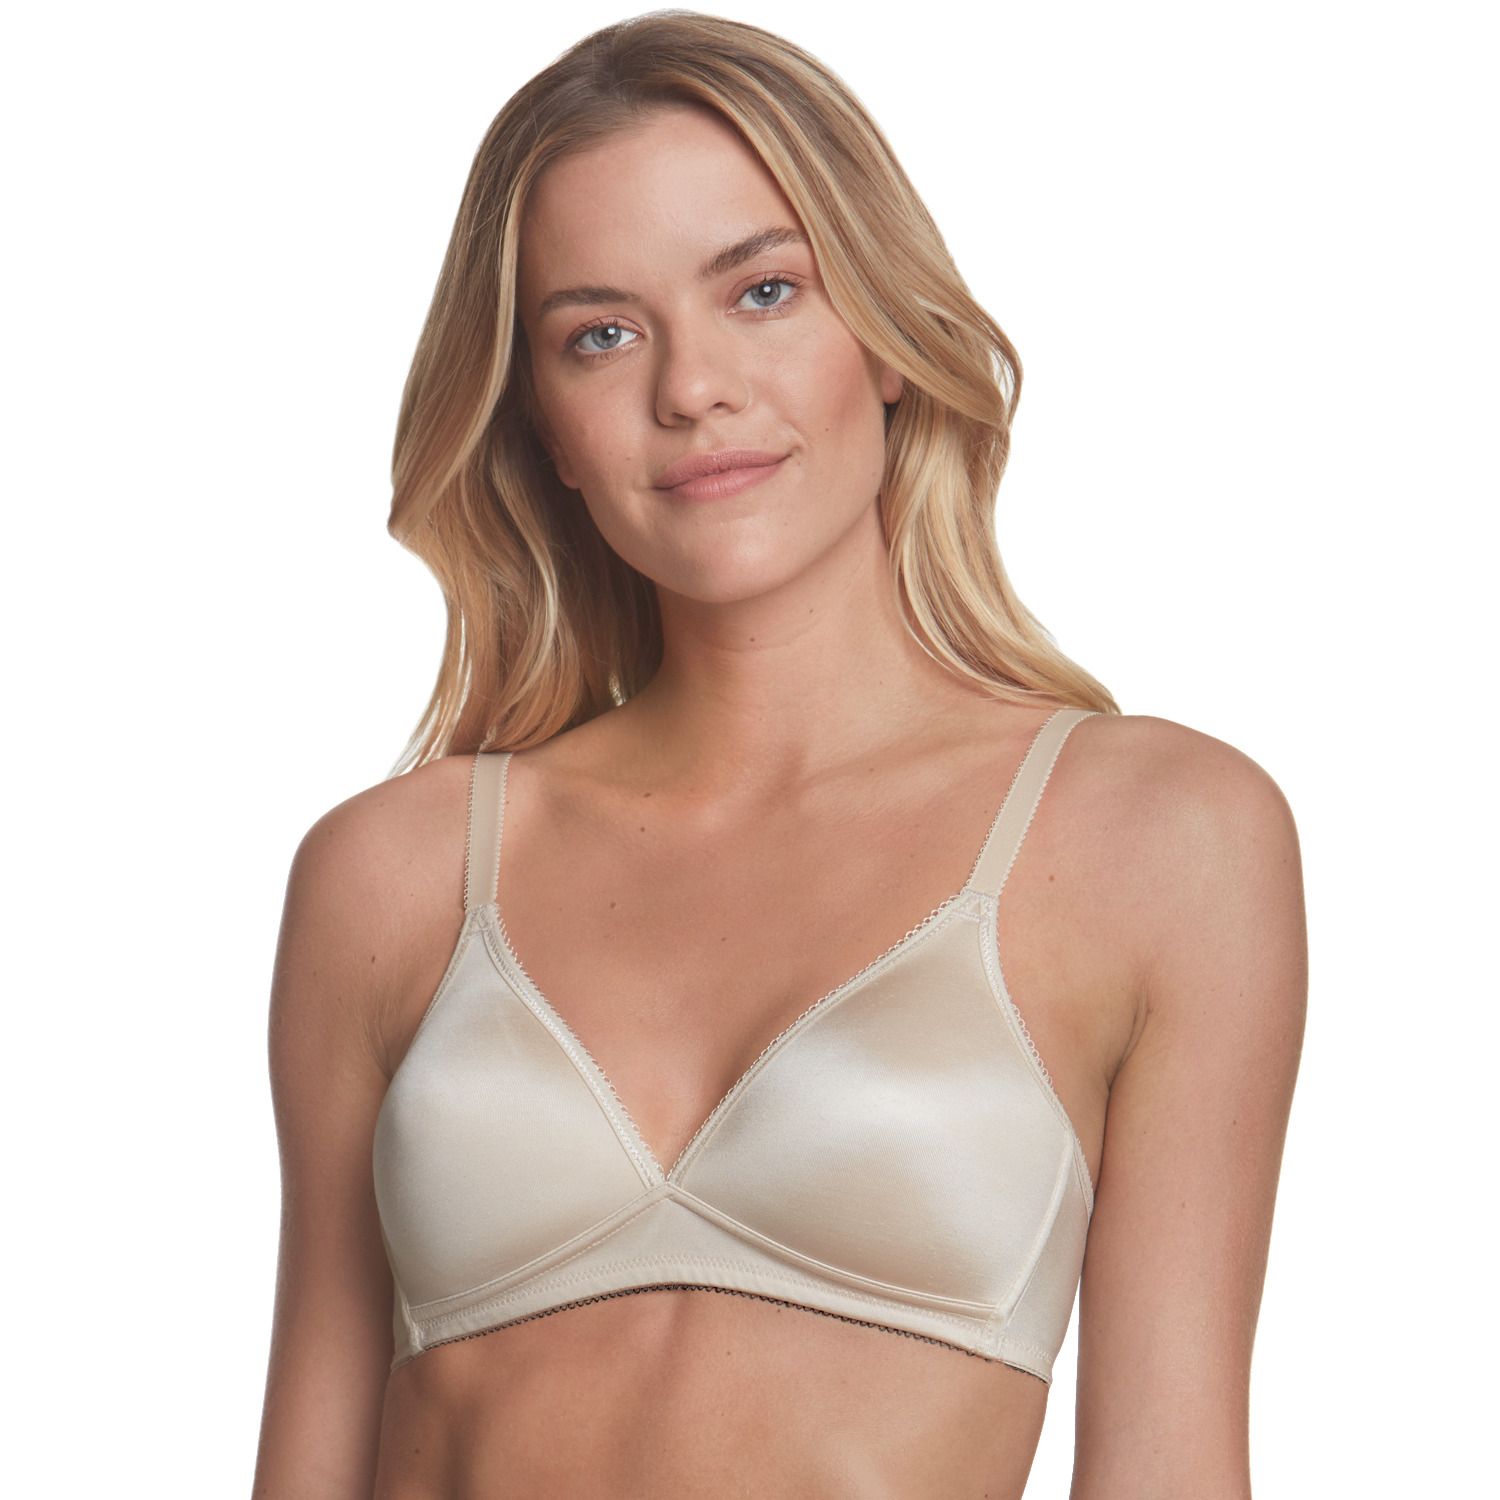 Matalan Coffee & Cream Underwired Smooth Cup Padded T-Shirt Bras 2-Pack 32C